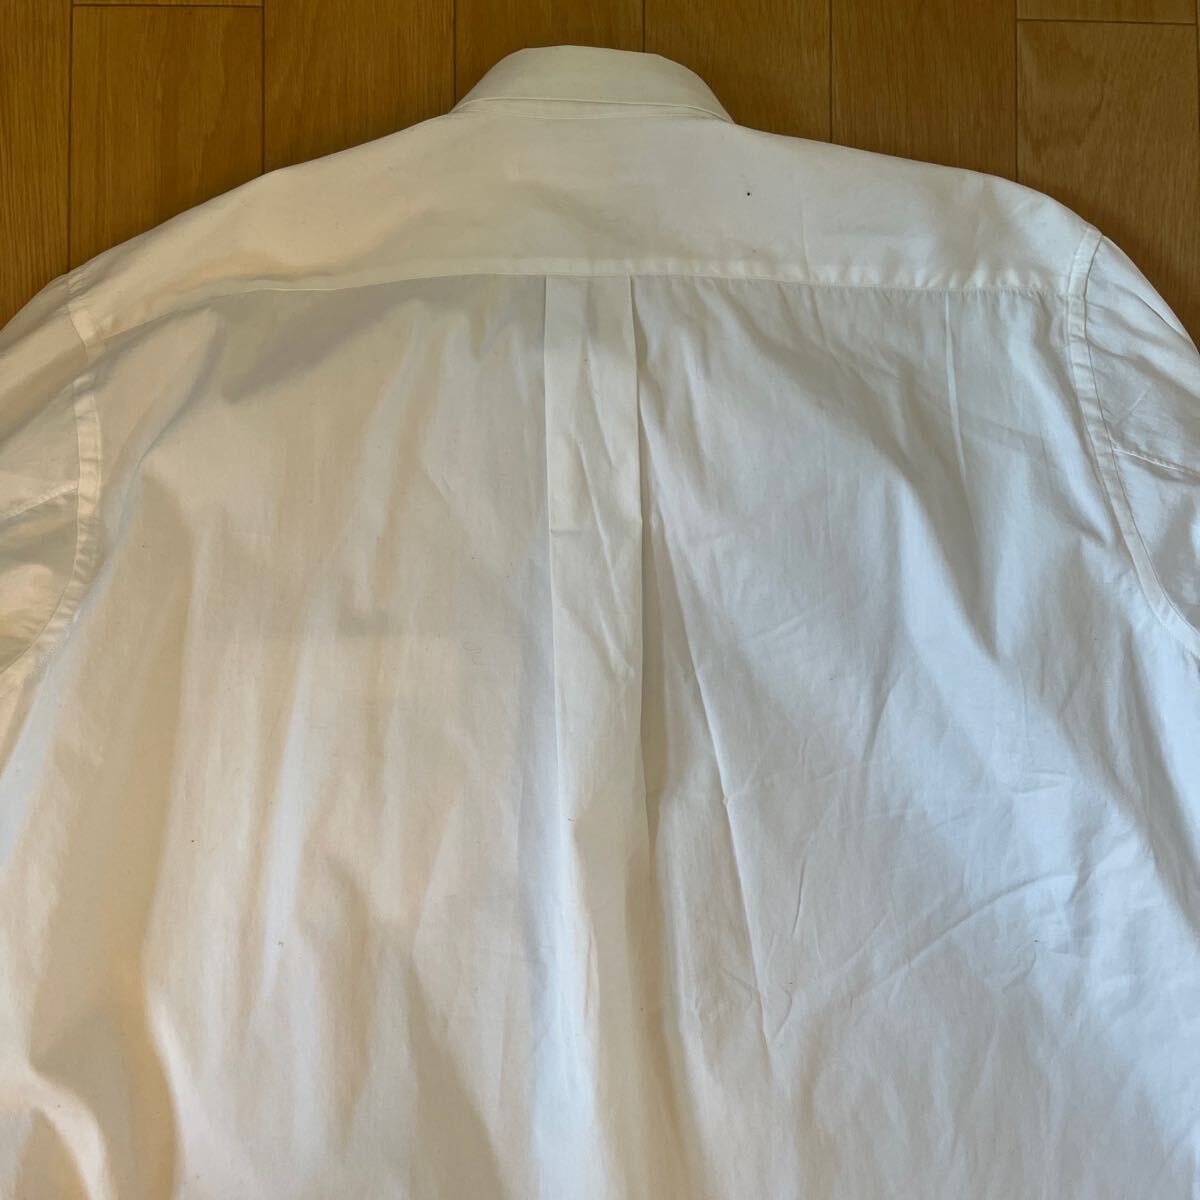 Comme des GARCONS SHIRT FOREVER WIDE CLASSIC WHITE L ギャルソン シャツ フォーエバー ワイドクラシックの画像5